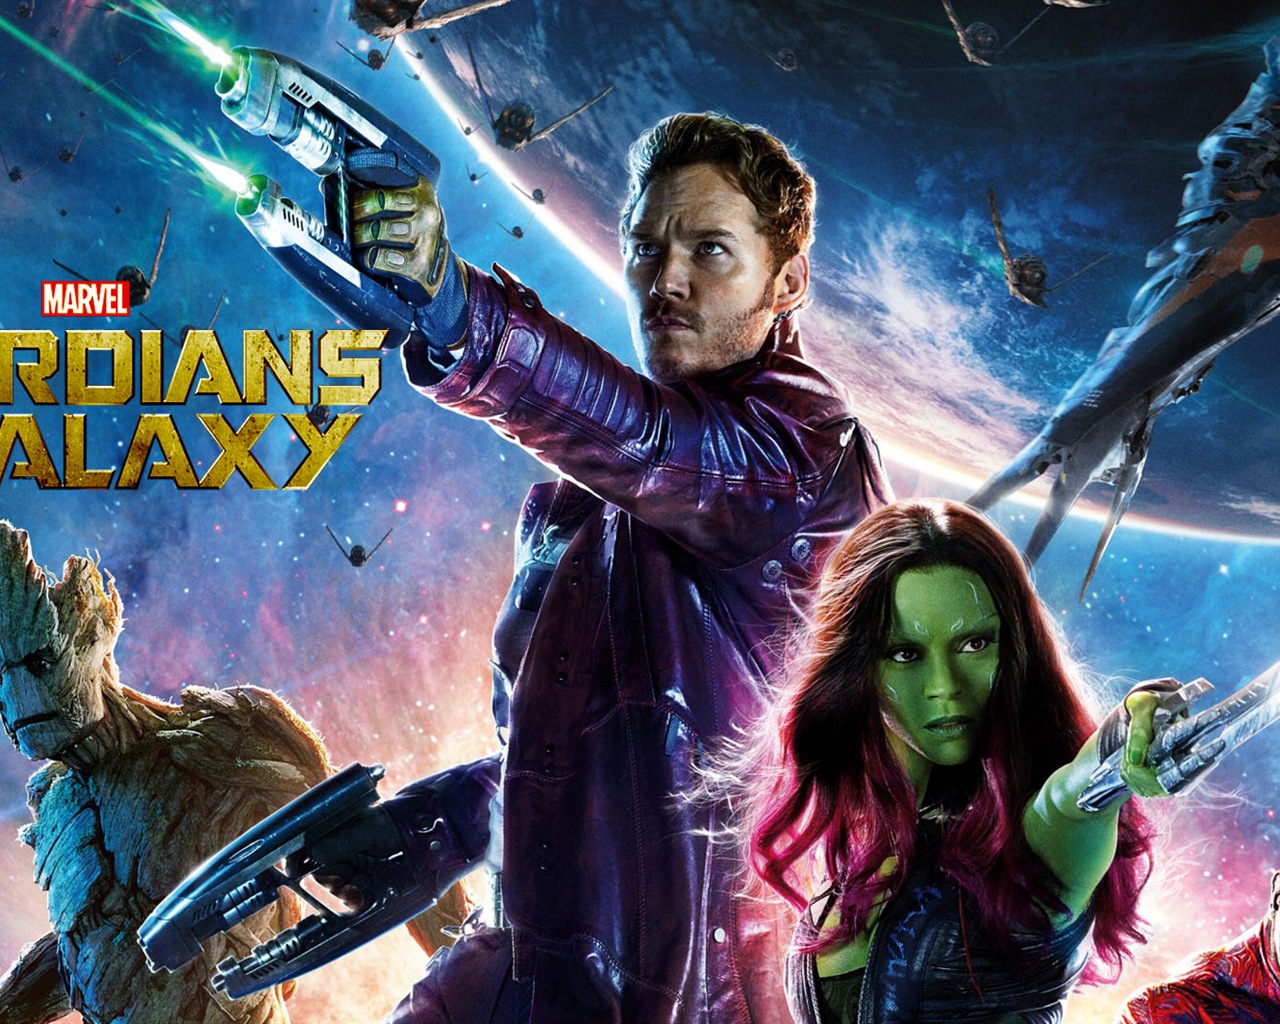 Guardians of the Galaxy 2014 HD movie wallpapers #15 - 1280x1024